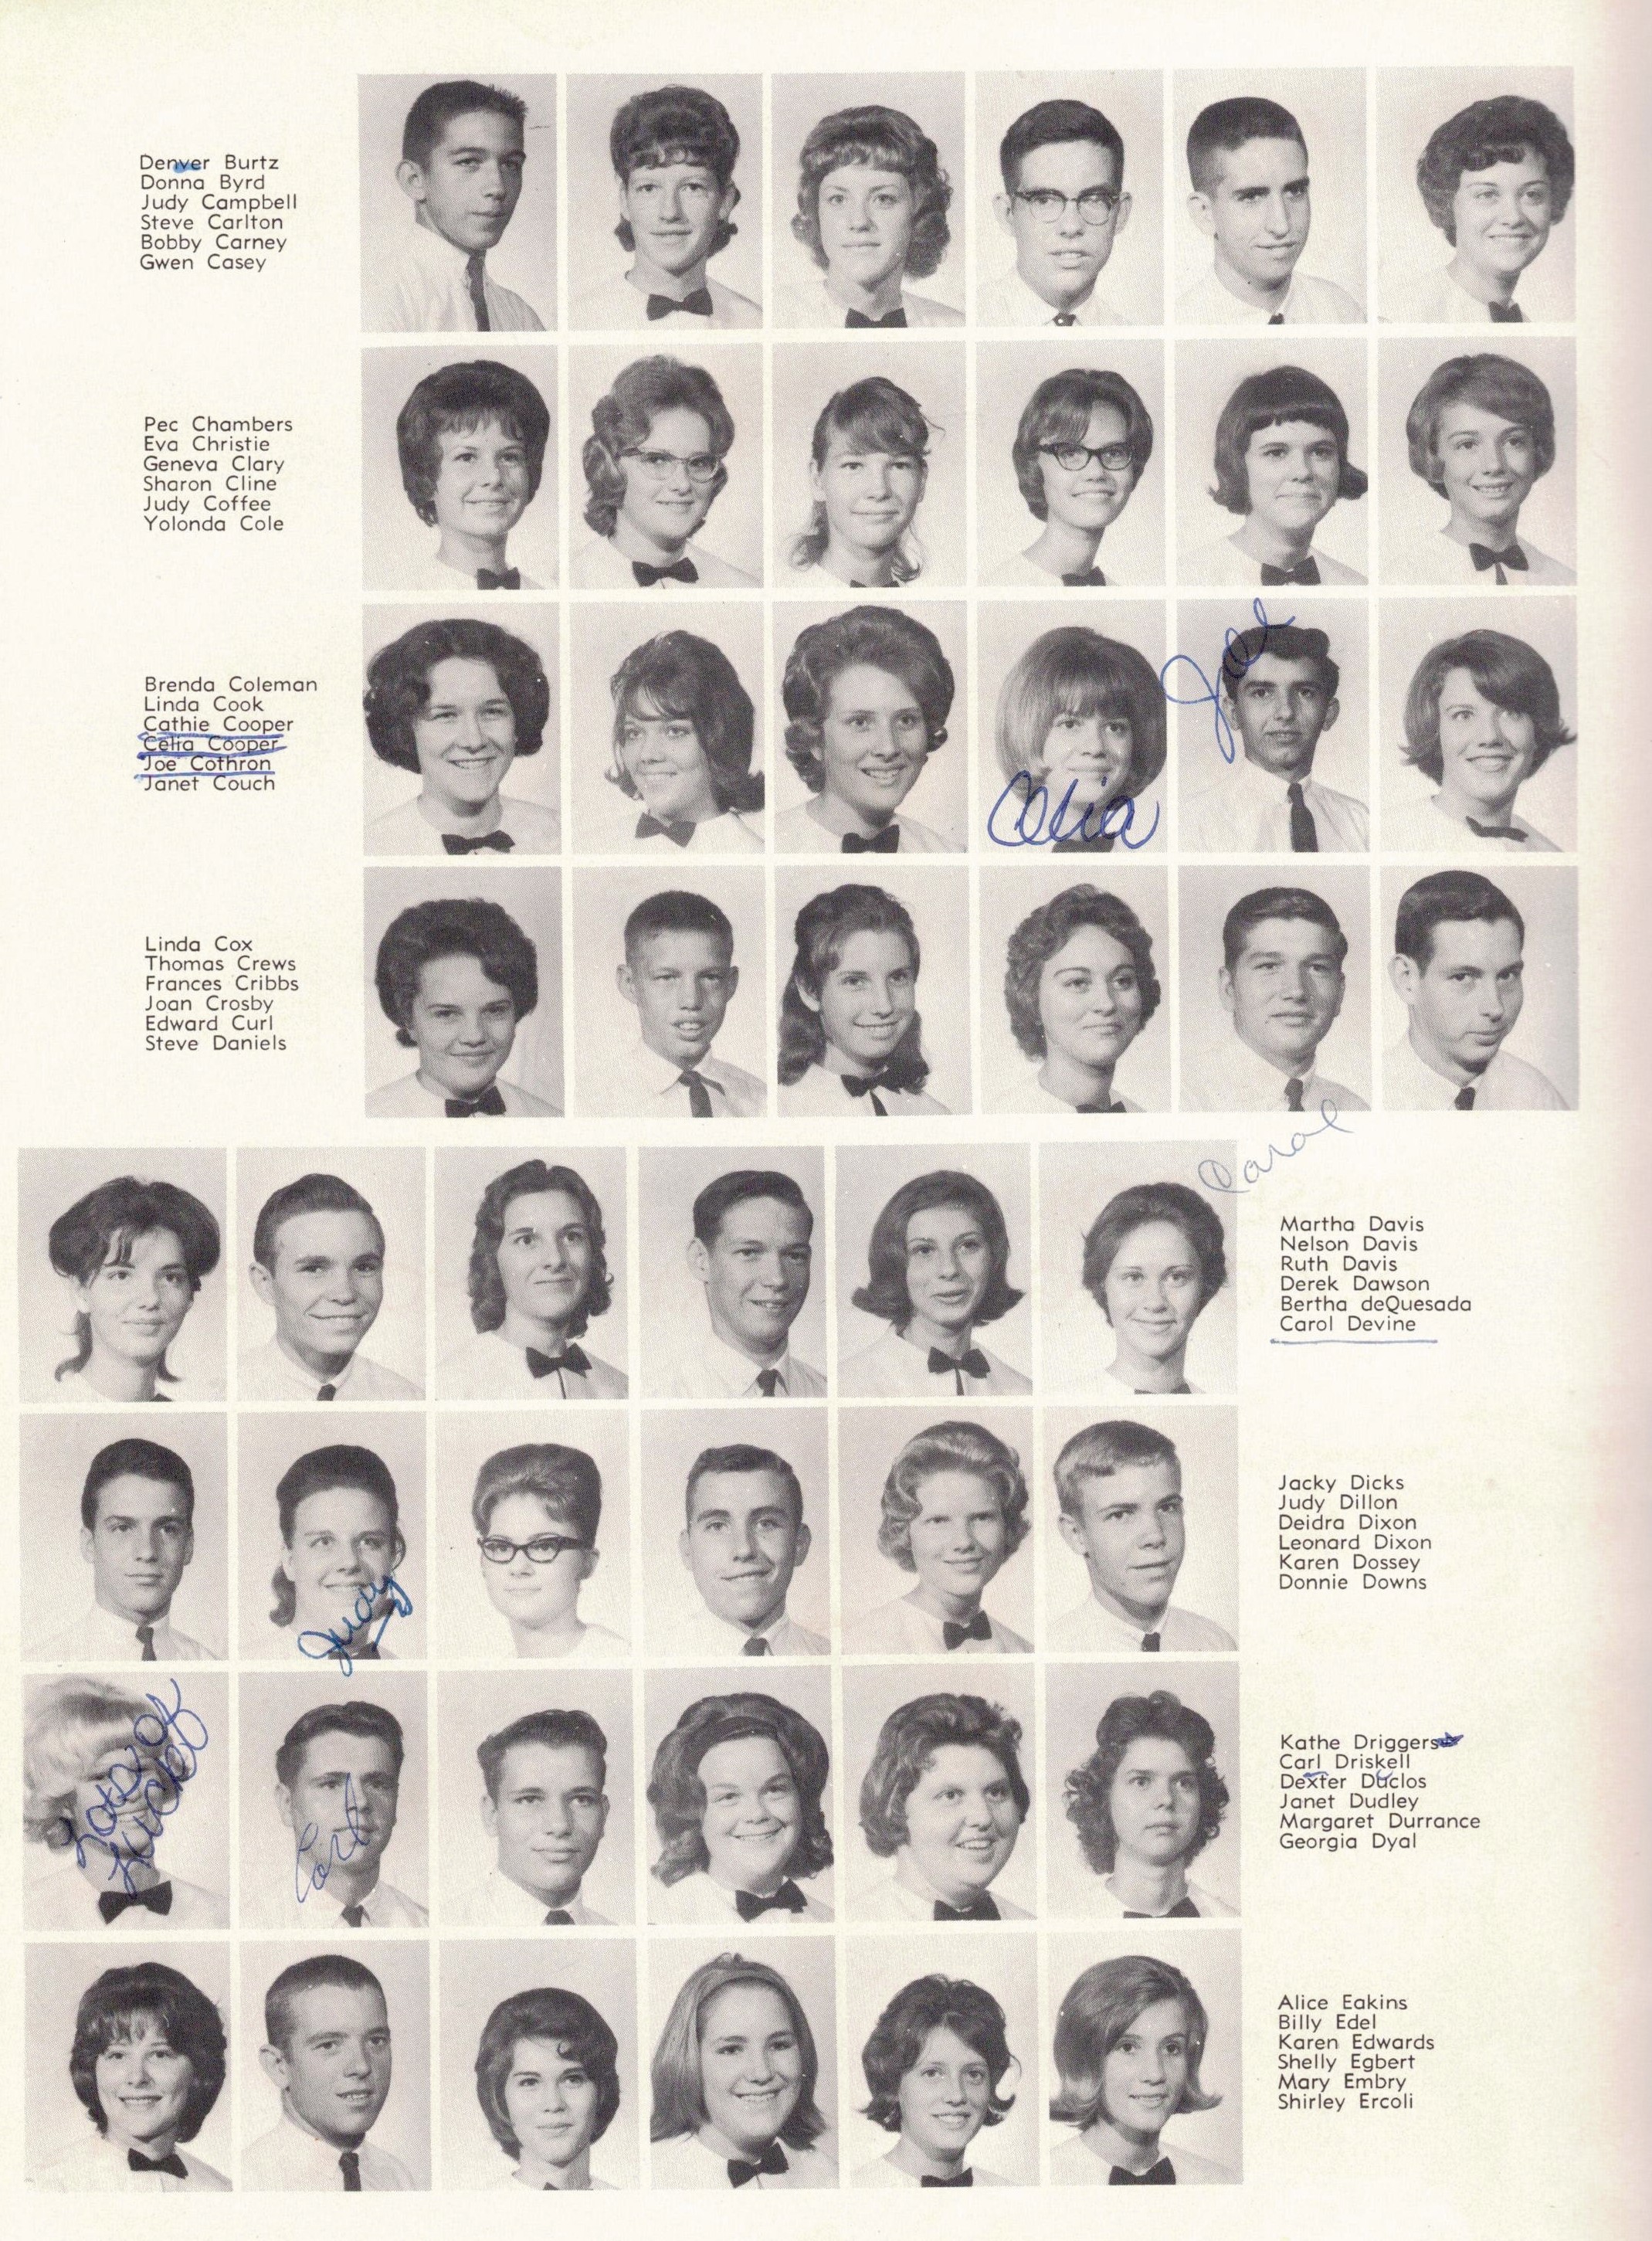 SOPHOMORES (IN 1965) (click on picture to zoom)